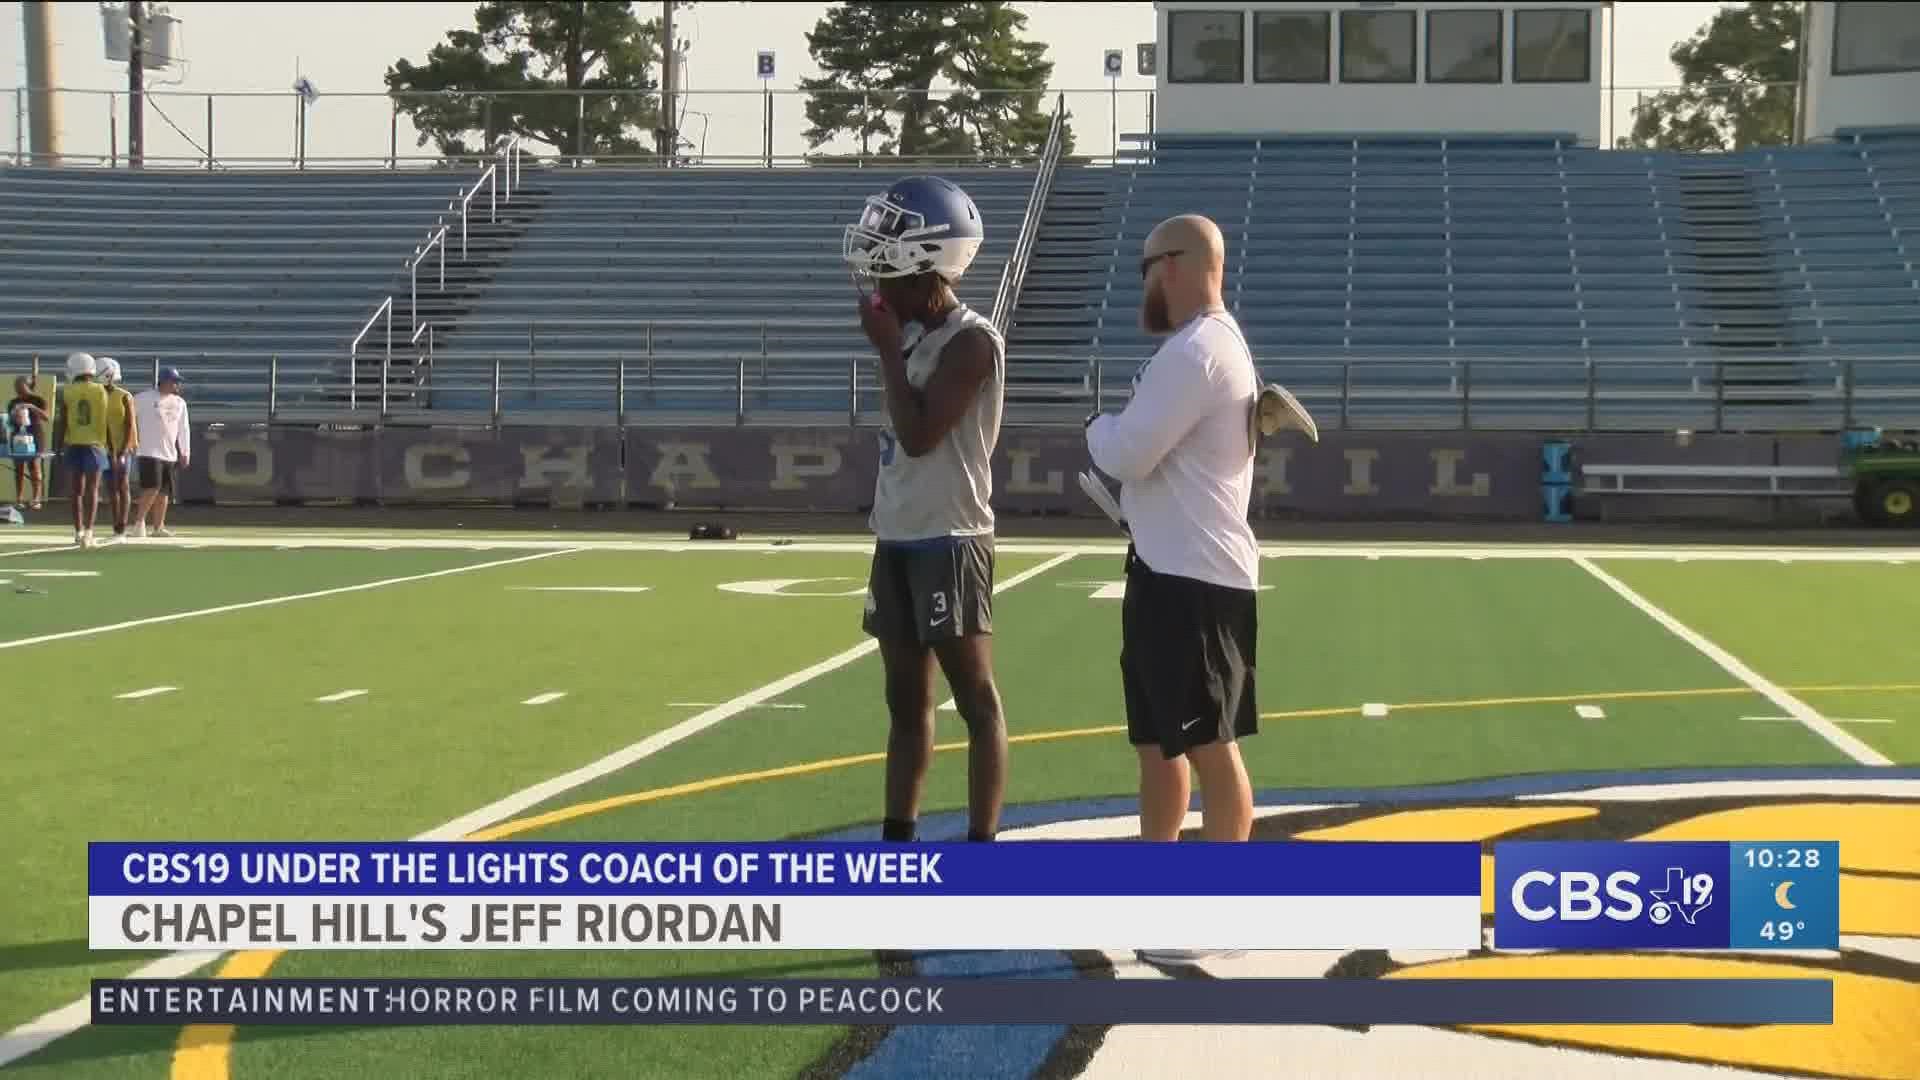 After putting up 79 points against the Lindale Eagles Friday, Chapel Hill coach, Jeff Riordan is our Under the Lights Coach of the Week